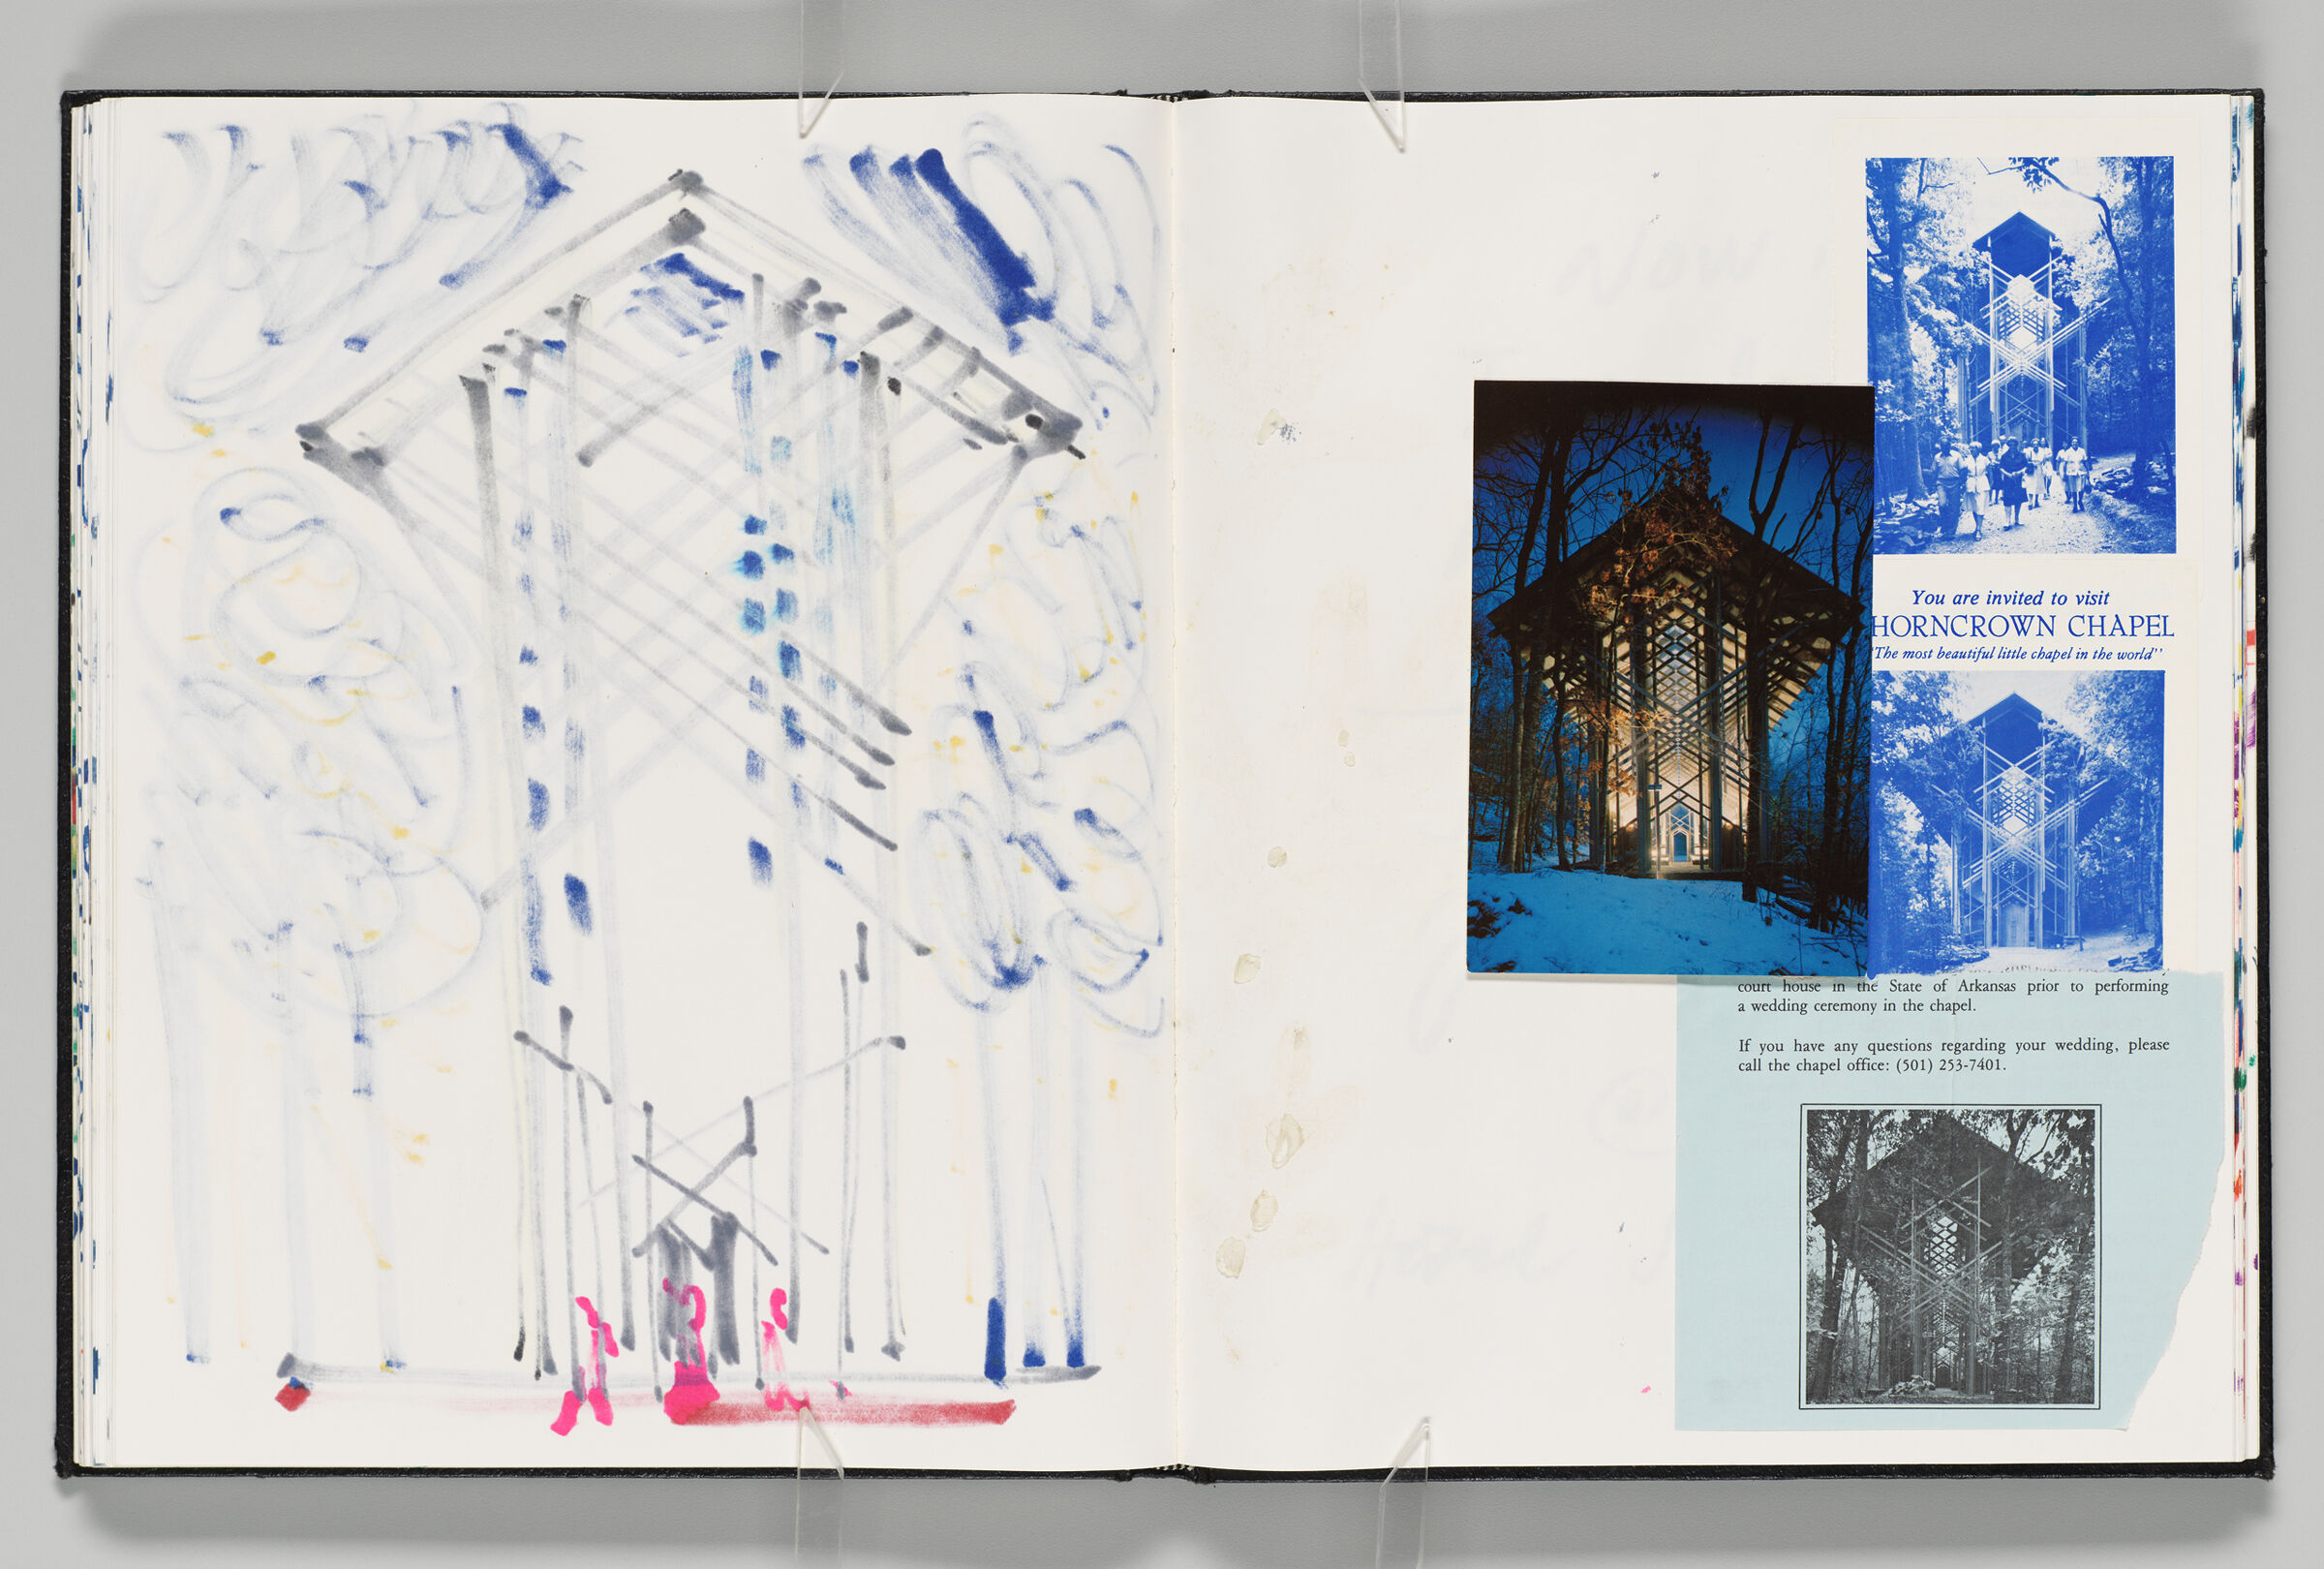 Untitled (Bleed-Through Of Previous Page, Left Page); Untitled (Adhered Thorncrown Chapel Materials, Right Page)